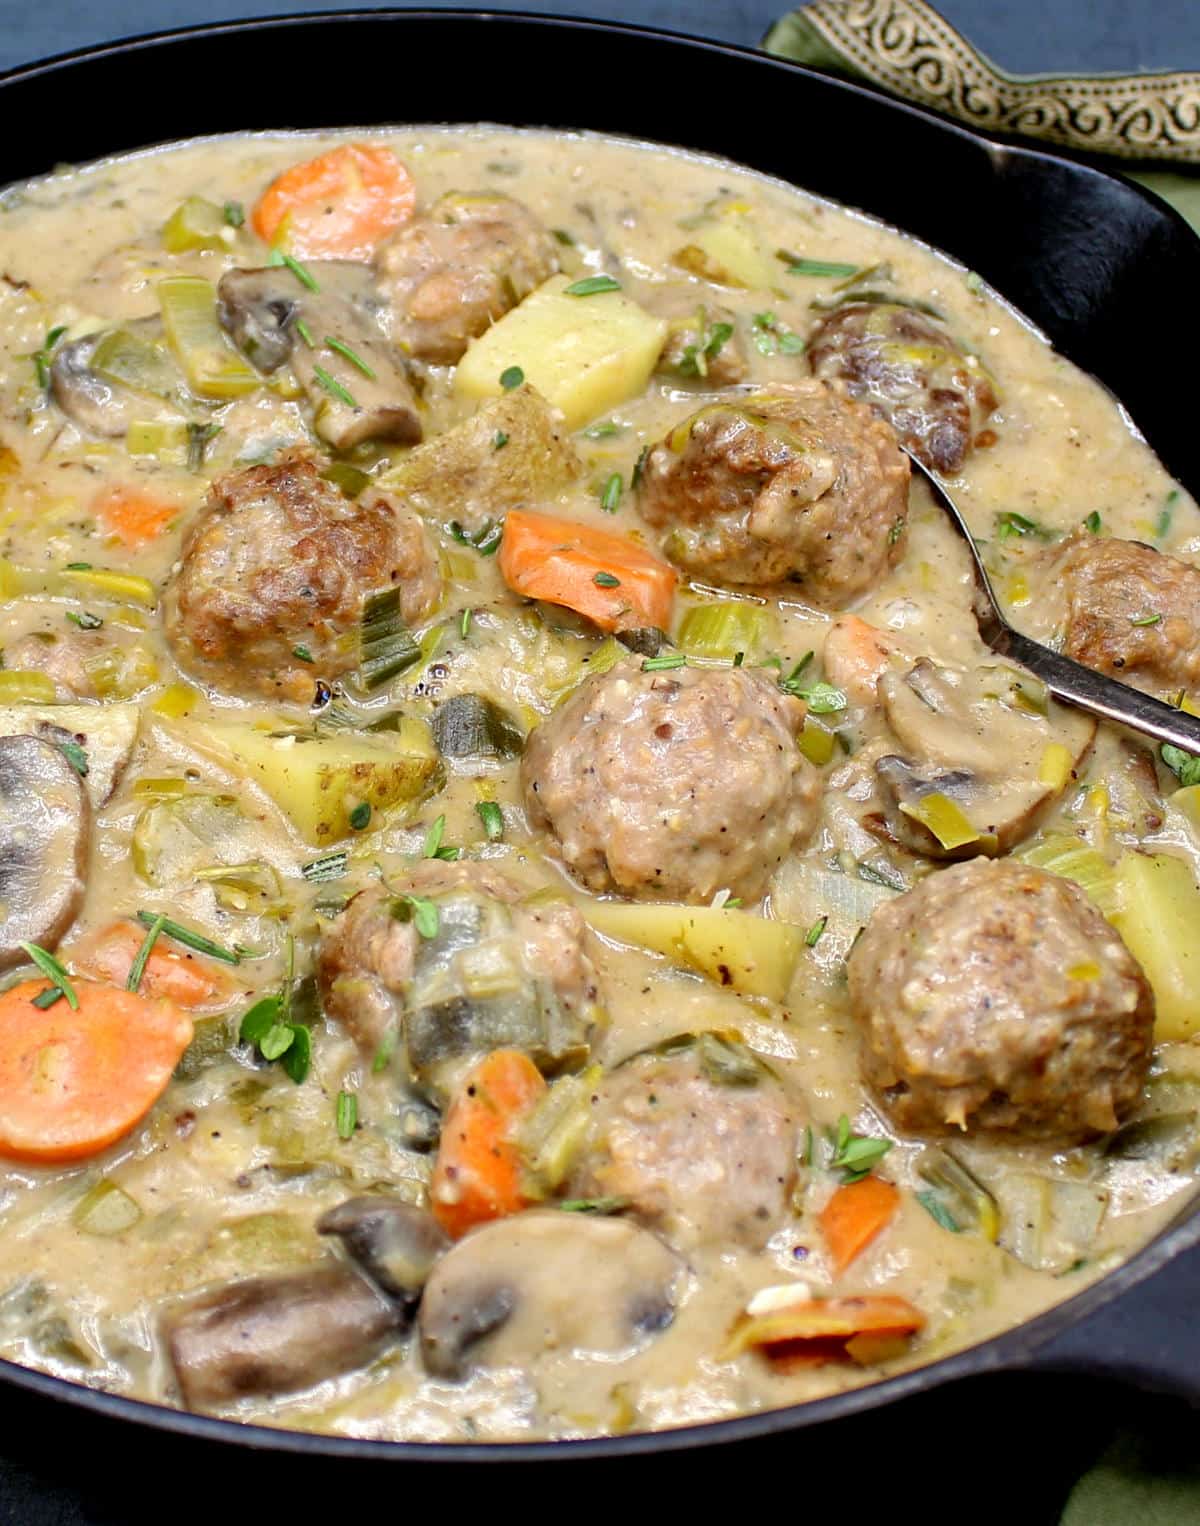 Creamy vegan meatball fricassee with herbs, meatballs, carrots, potatoes, mushrooms and cajun spices.